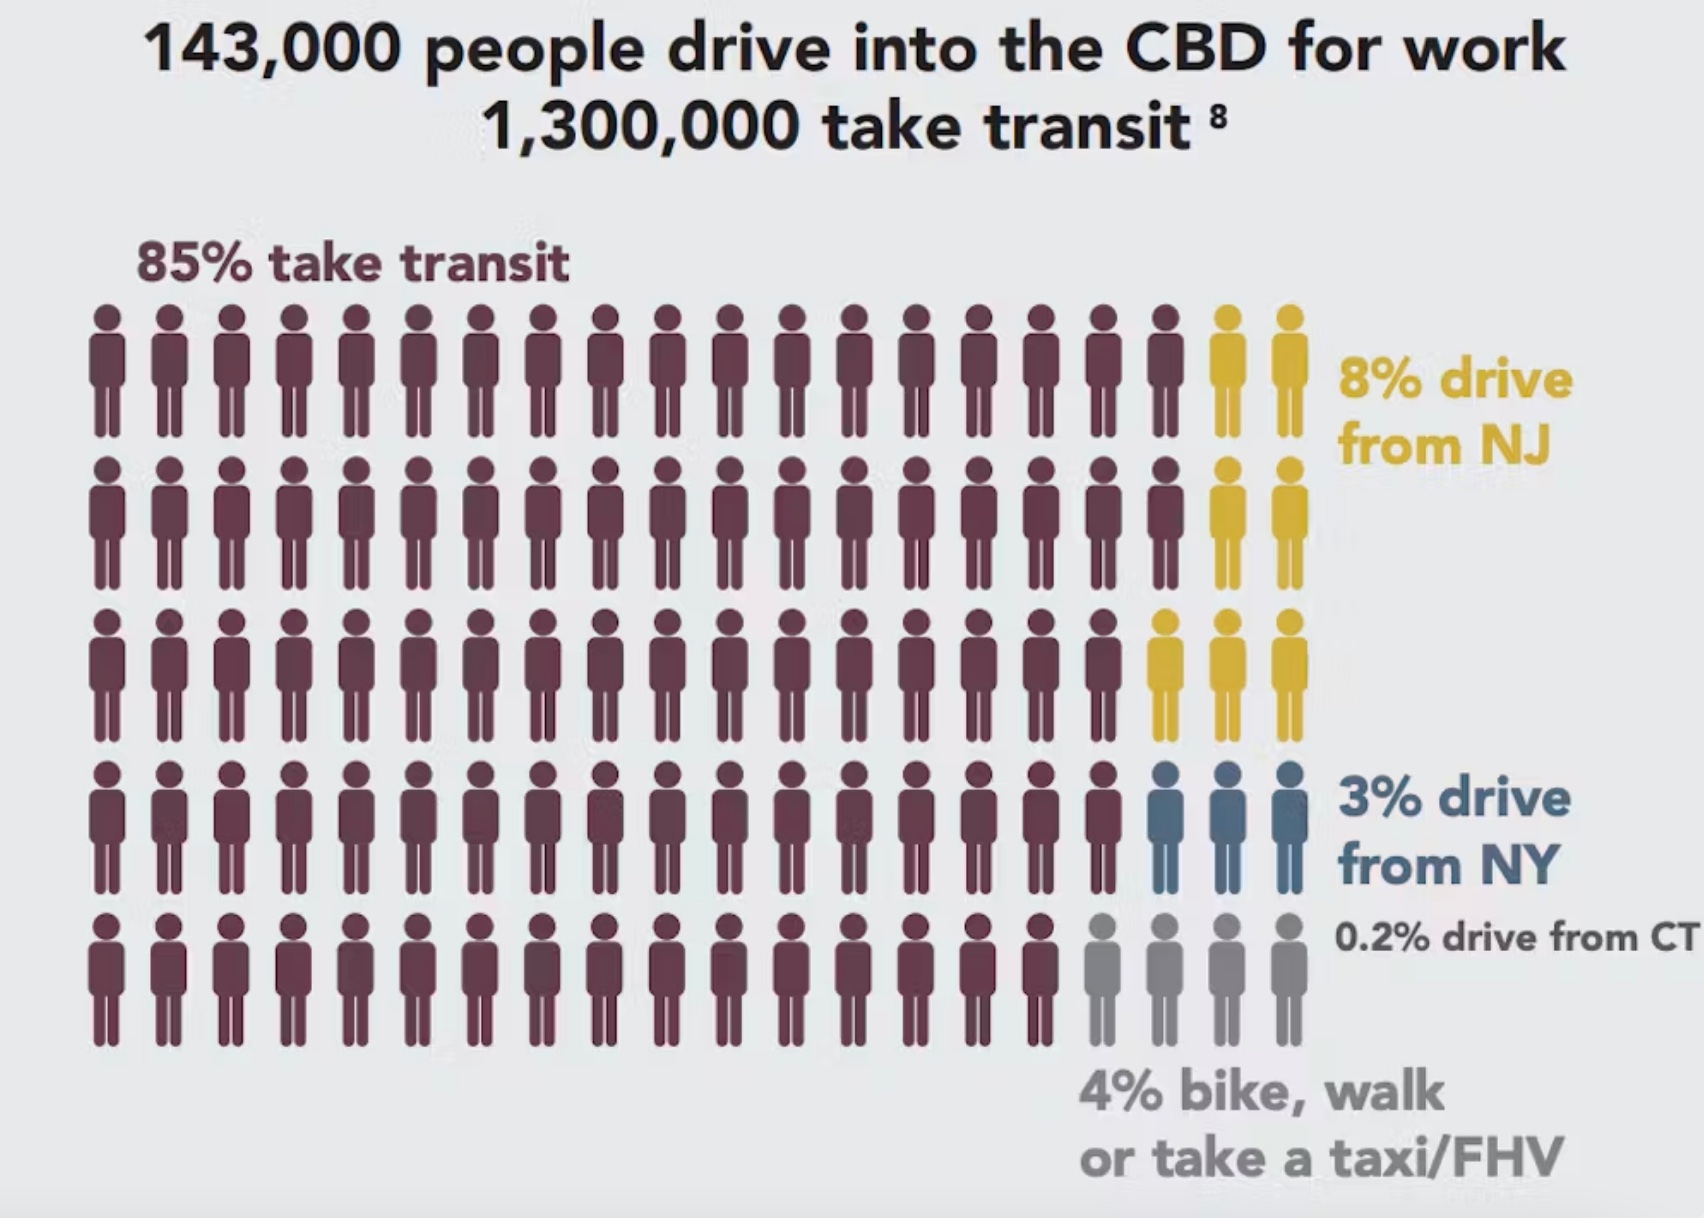 Infographic showing modes of transportation for 143,000 workers commuting to the cbd: 85% by transit, 8% from nj, 3% from ny, 0.2% from ct, and 4% by biking, walking, or taxi.